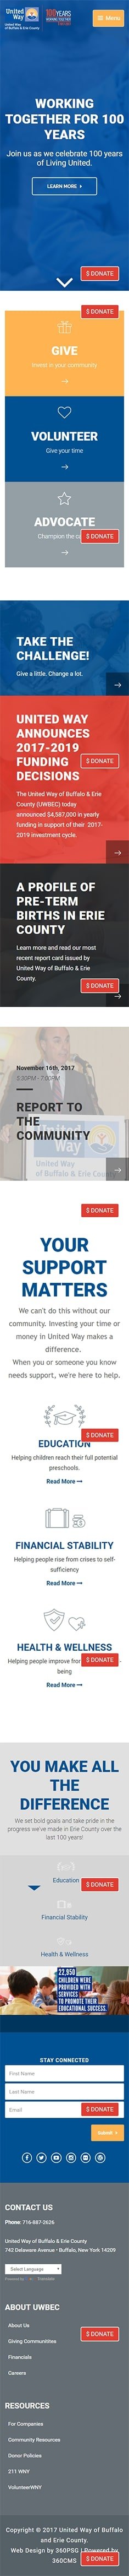 United Way Mobile